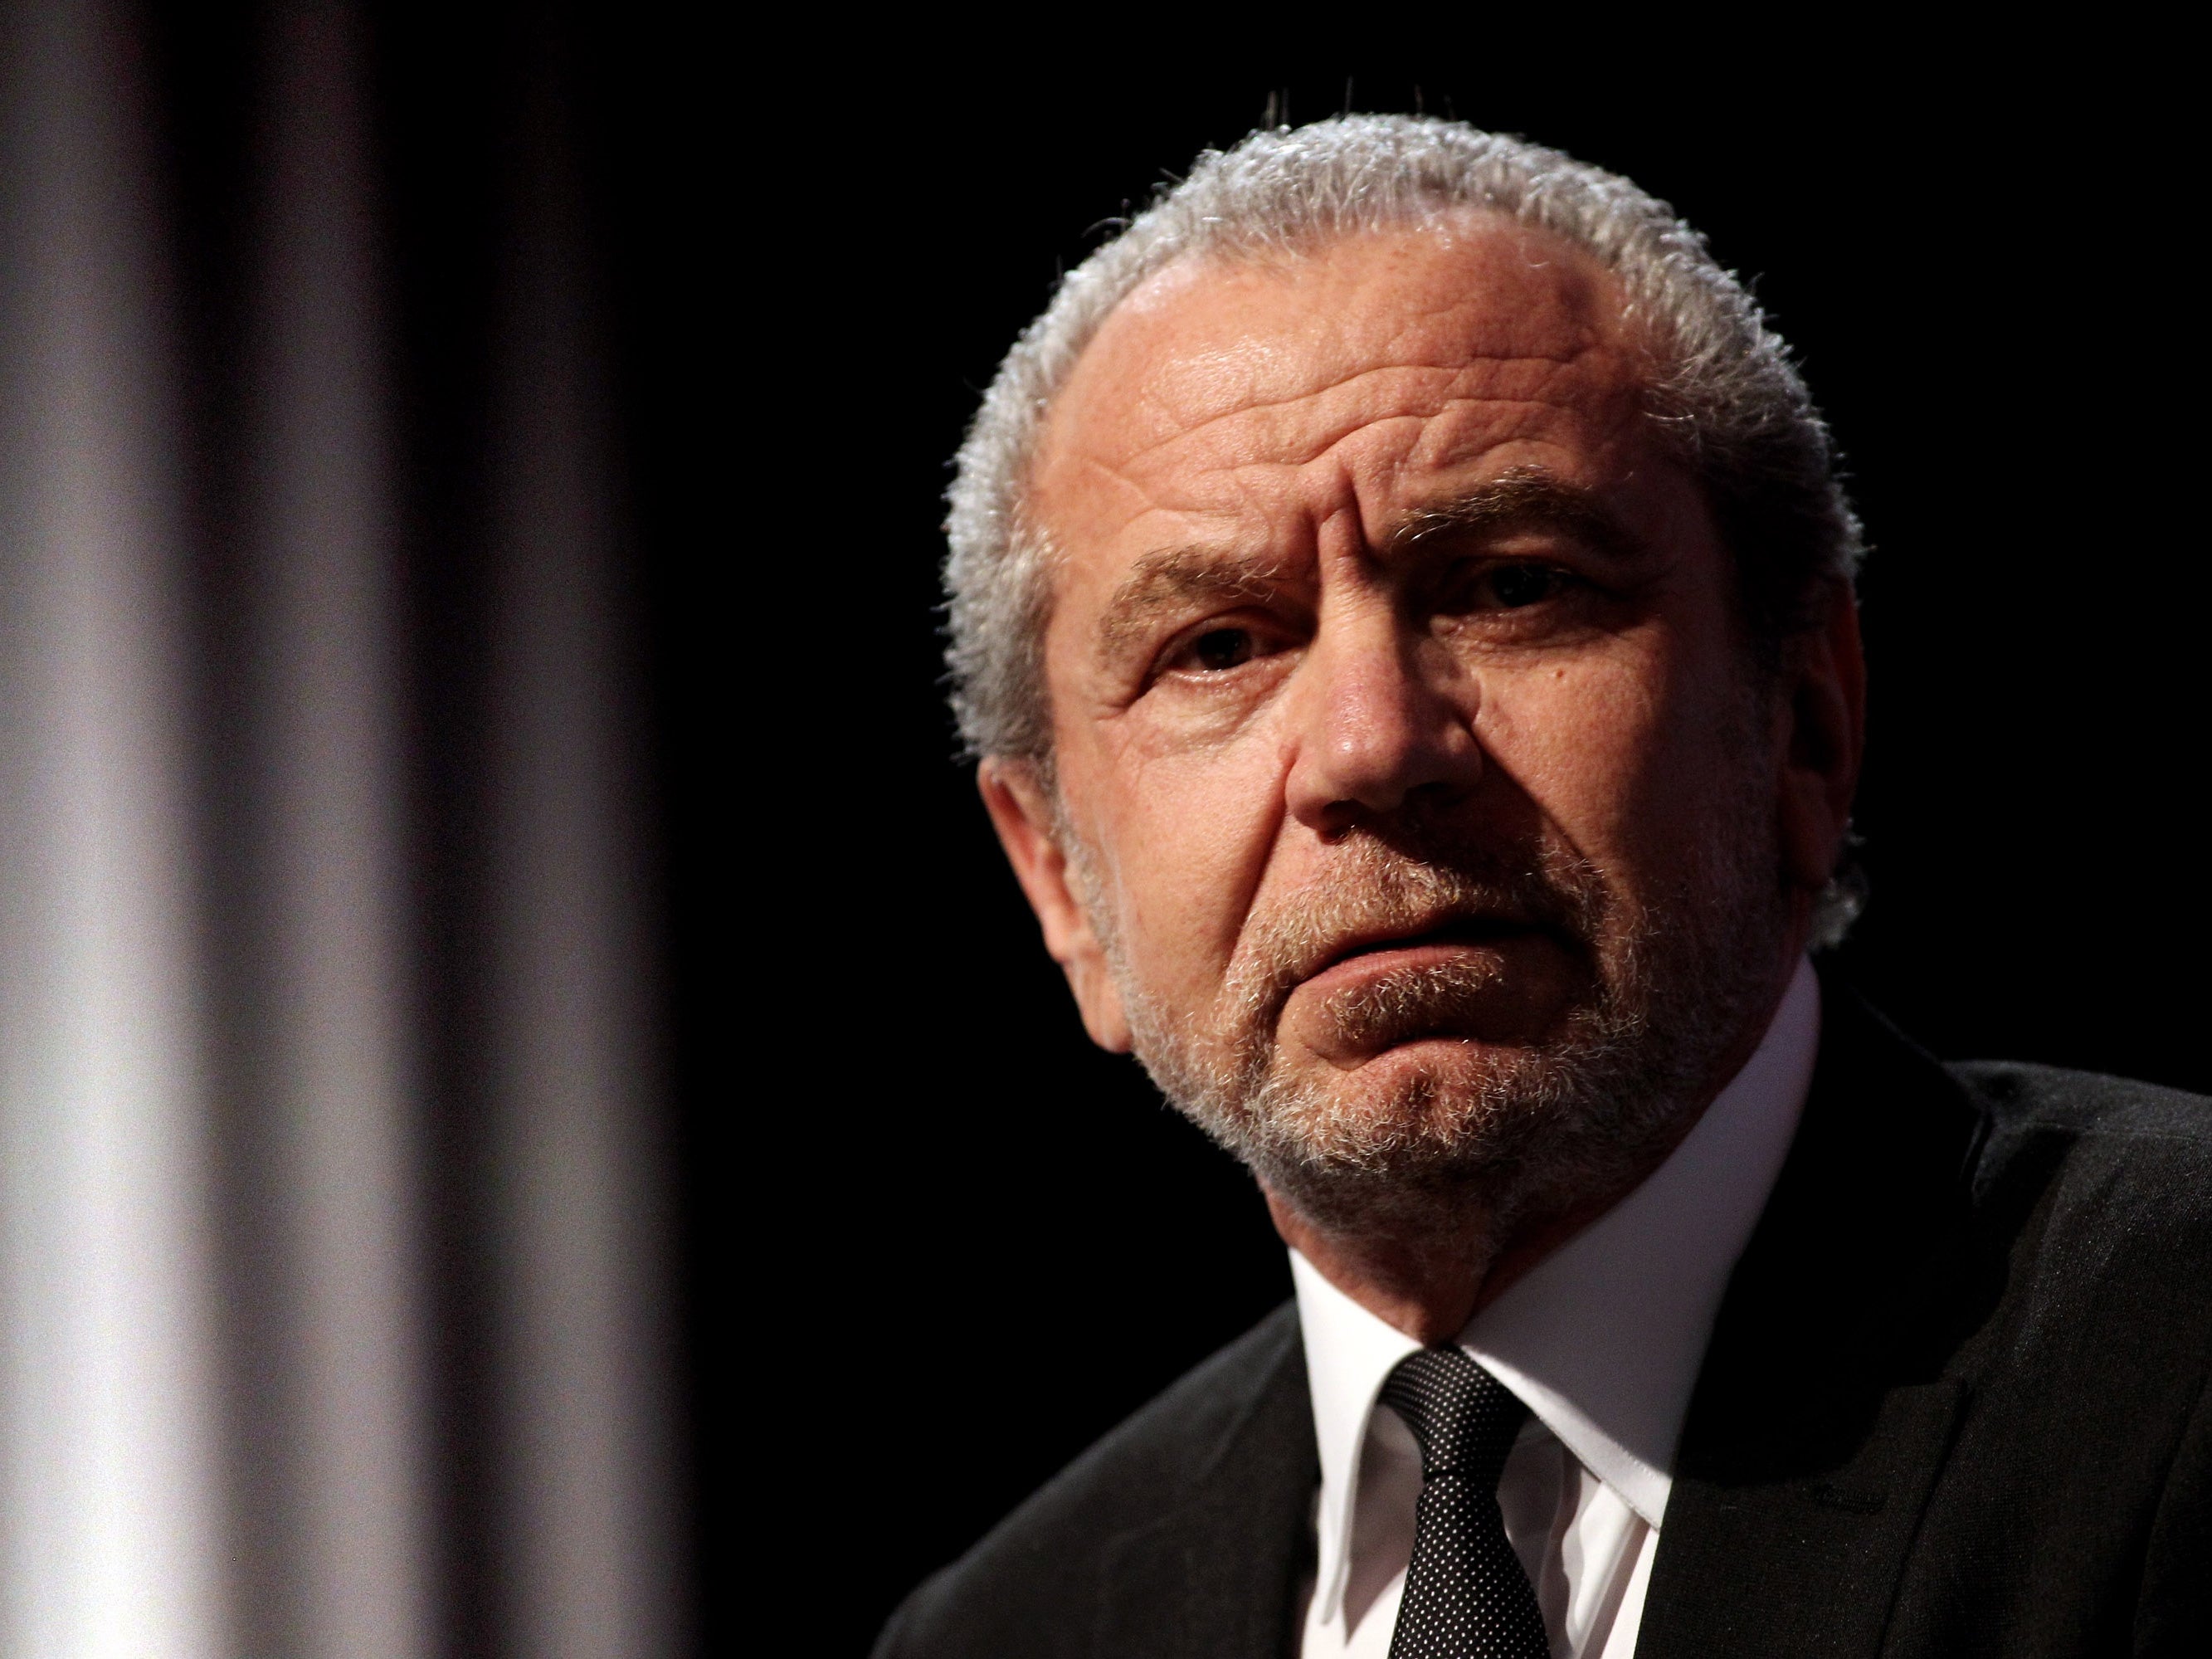 Alan Sugar has been accused of racism over questioning Gisela Stuart's right to participate in the debates